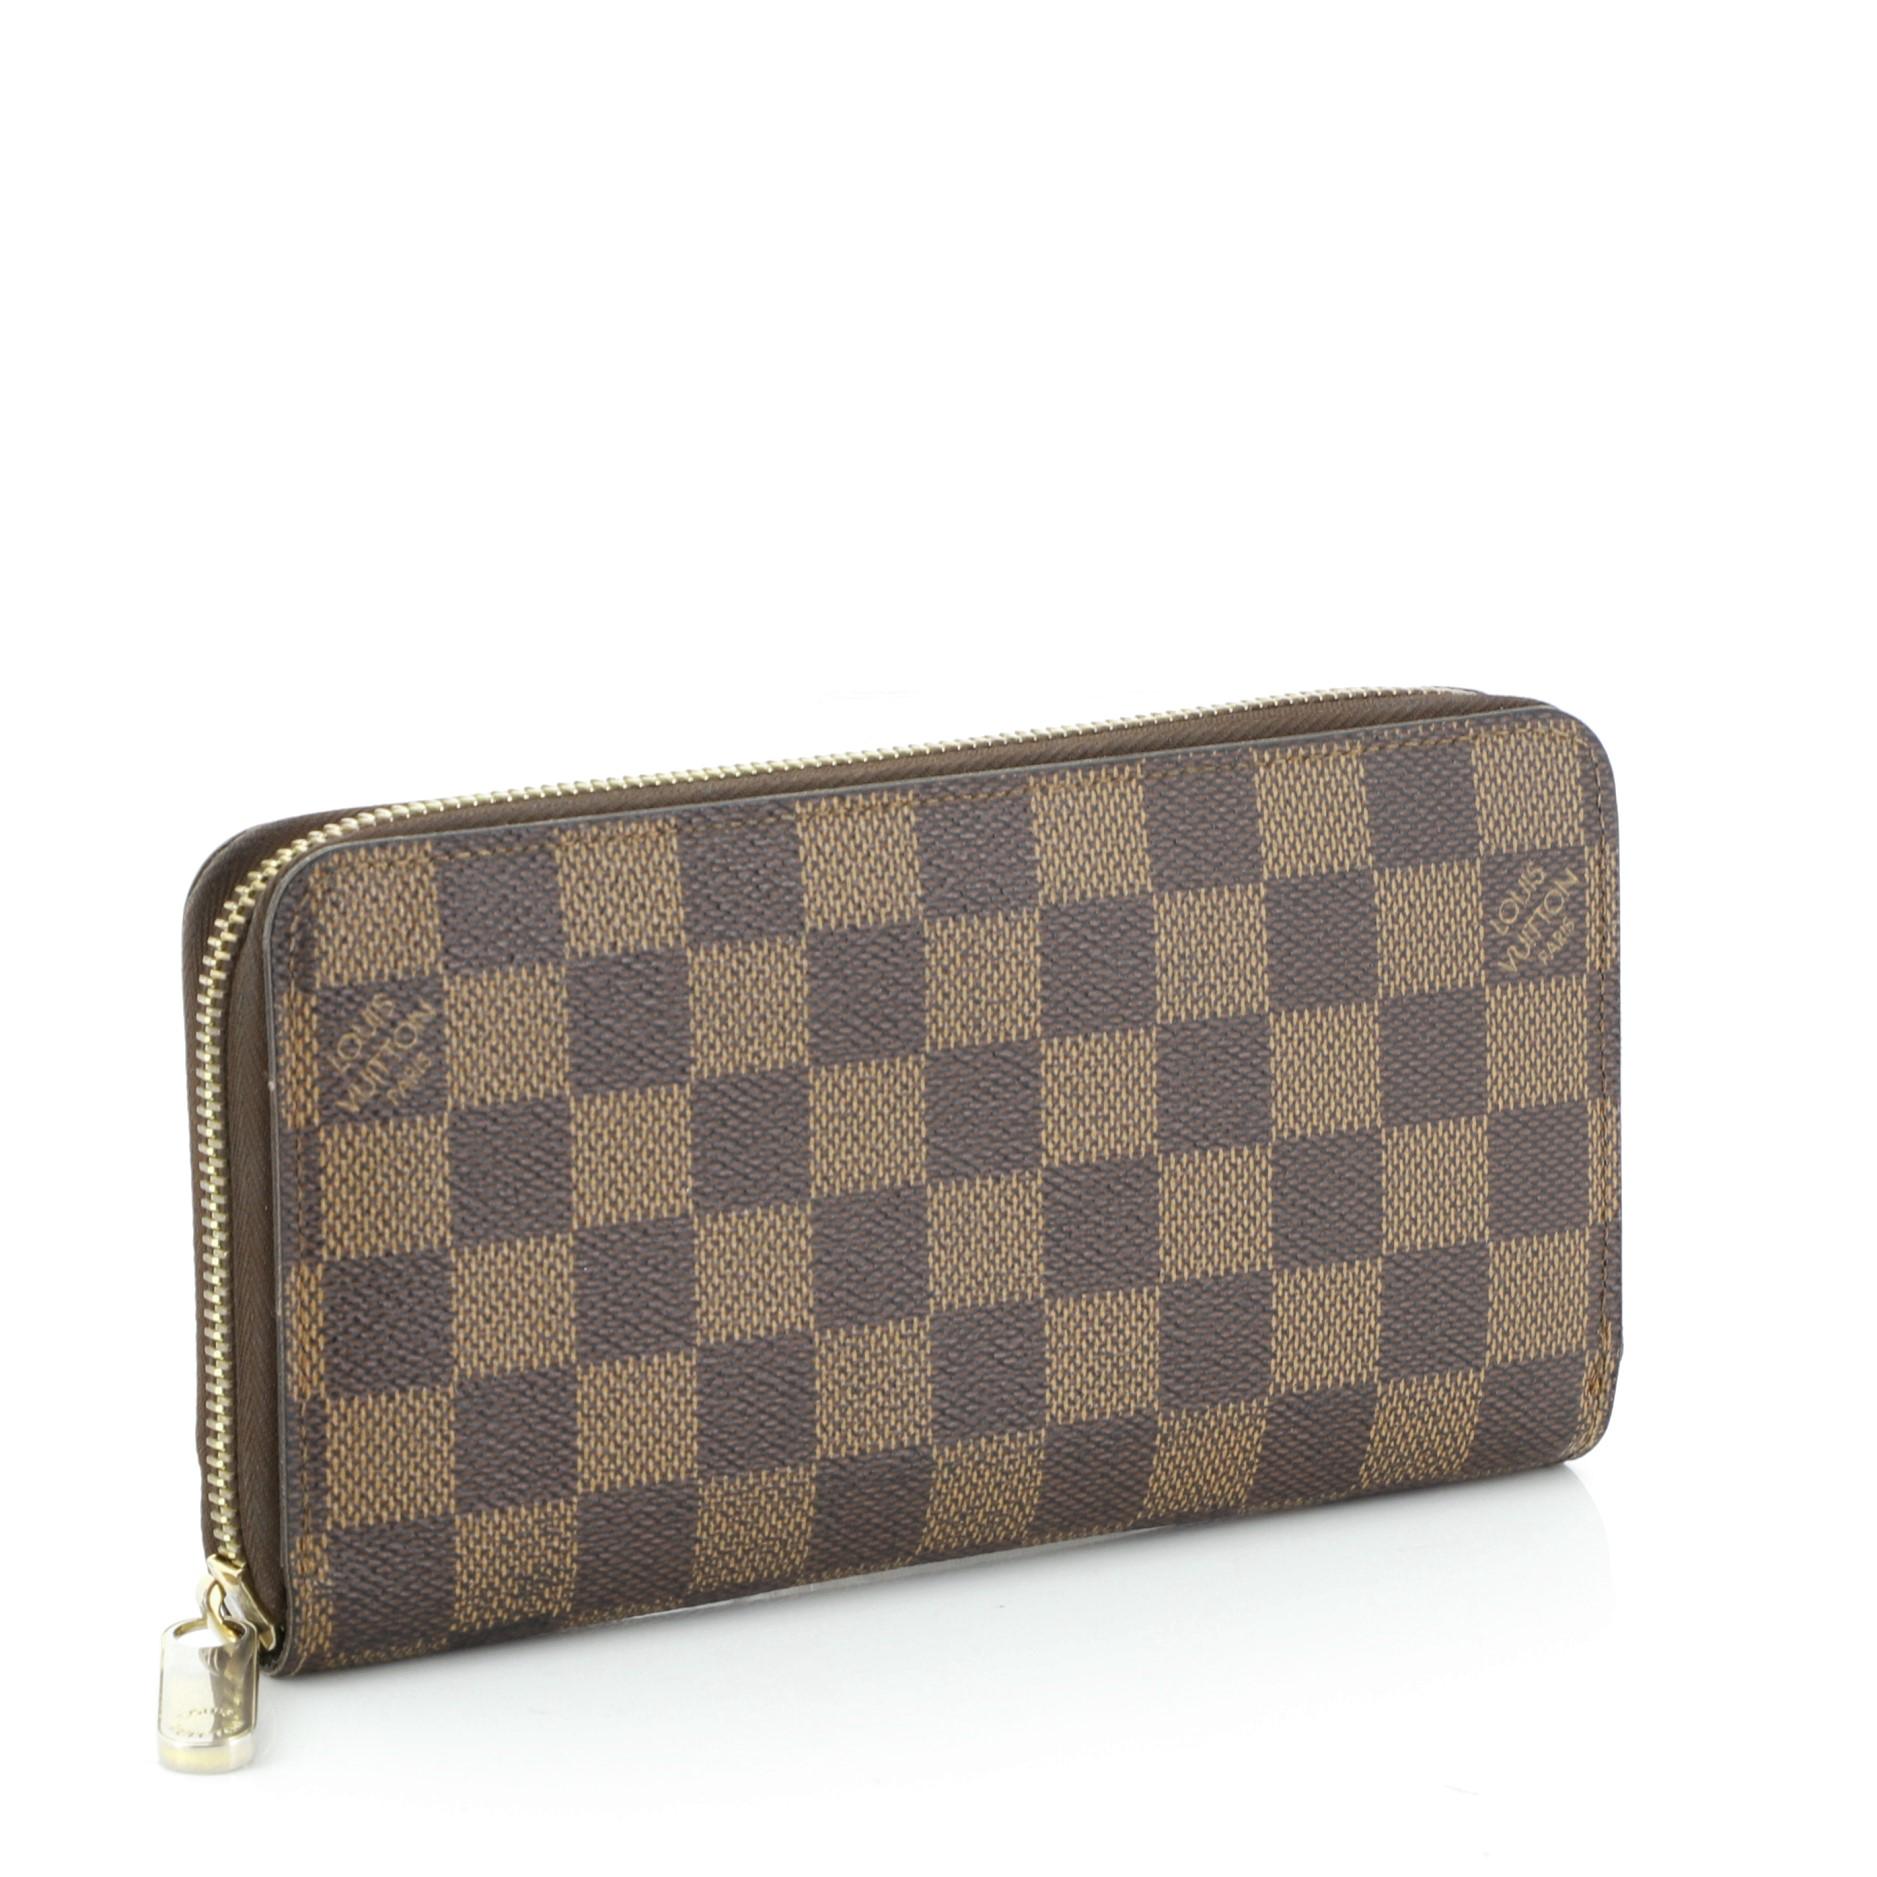 This Louis Vuitton Zippy Wallet Damier, crafted from damier ebene coated canvas, features gold-tone hardware. Its all-around zip closure opens to a brown leather interior with multiple card slots, two gusseted open pockets, and zip pocket.